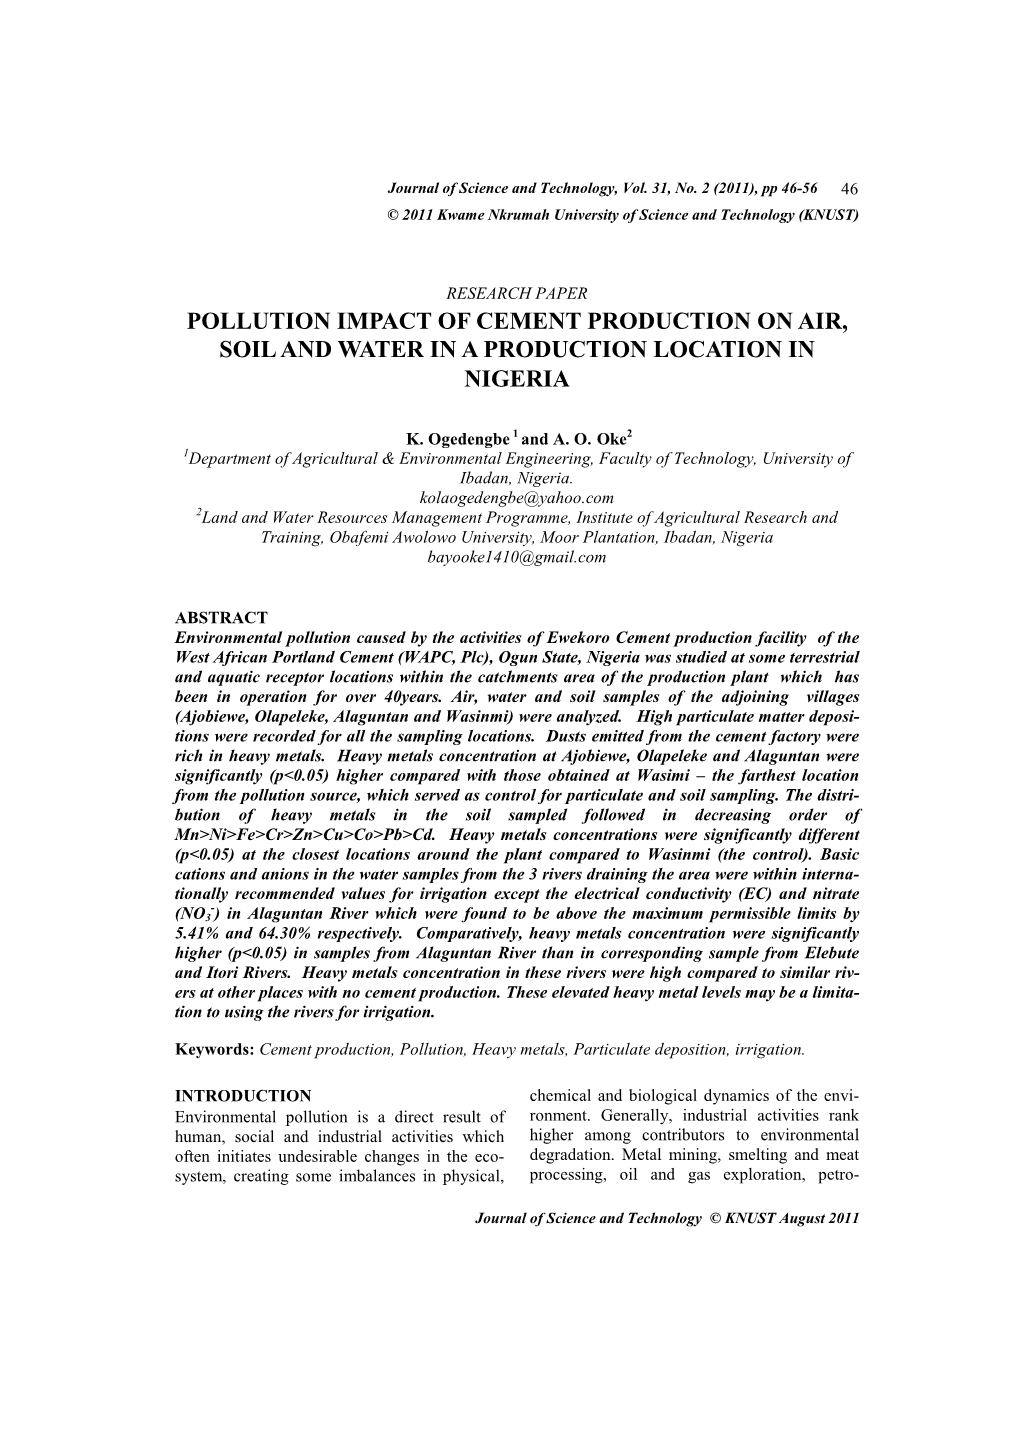 Pollution Impact of Cement Production on Air, Soil and Water in a Production Location in Nigeria